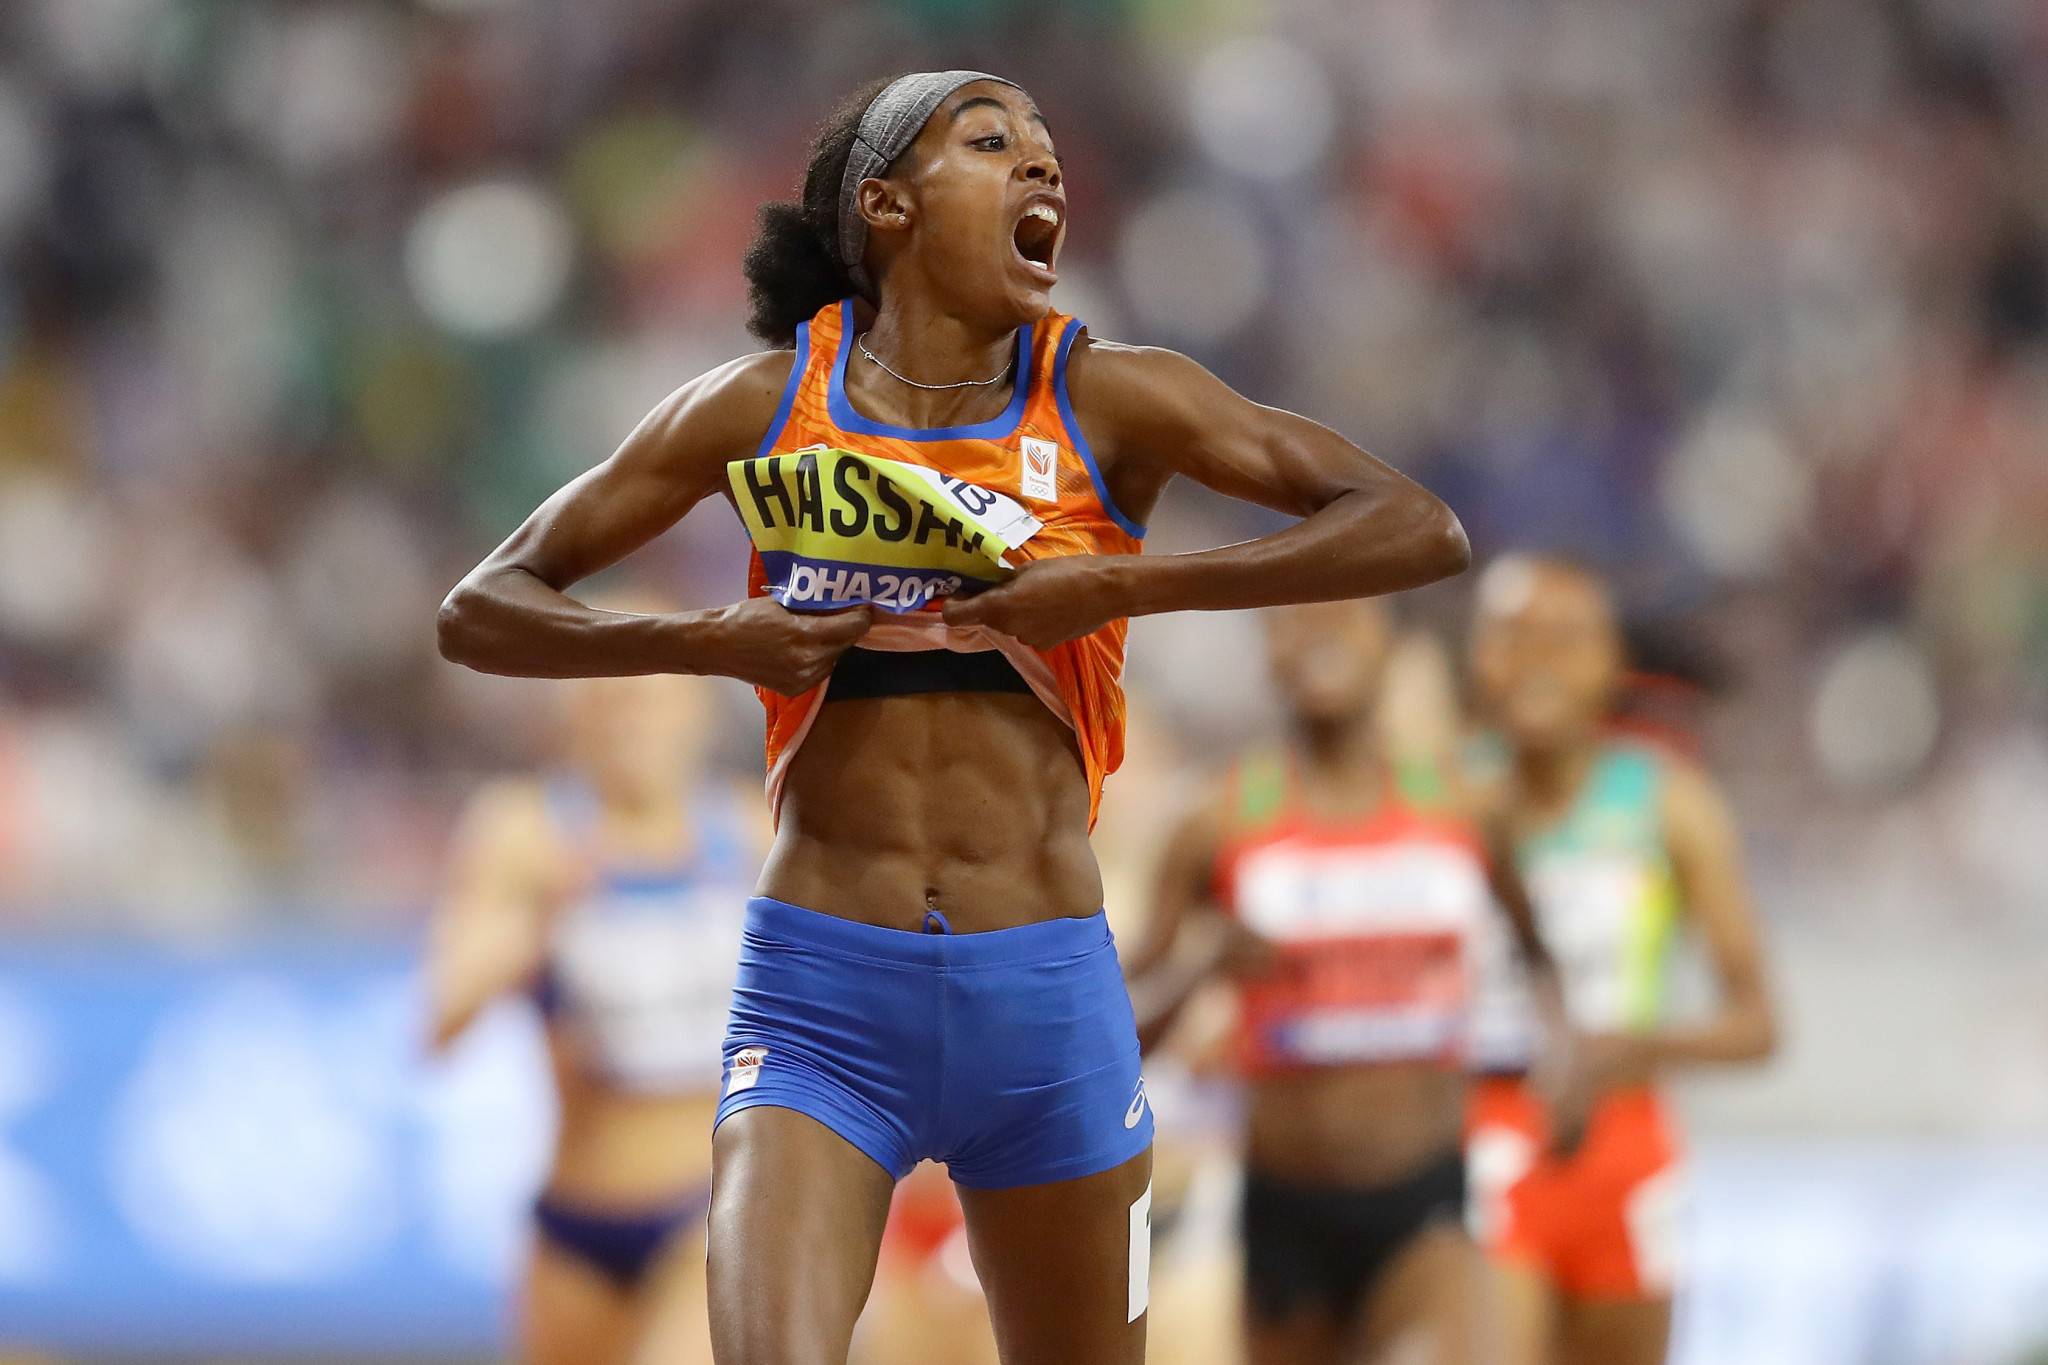 The Netherlands' Sifan Hassan, winner of the 1,500 and 10,000 metres, is among the athletes competing at the IAAF World Championships coached by disgraced American coach Alberto Salazar ©Getty Images